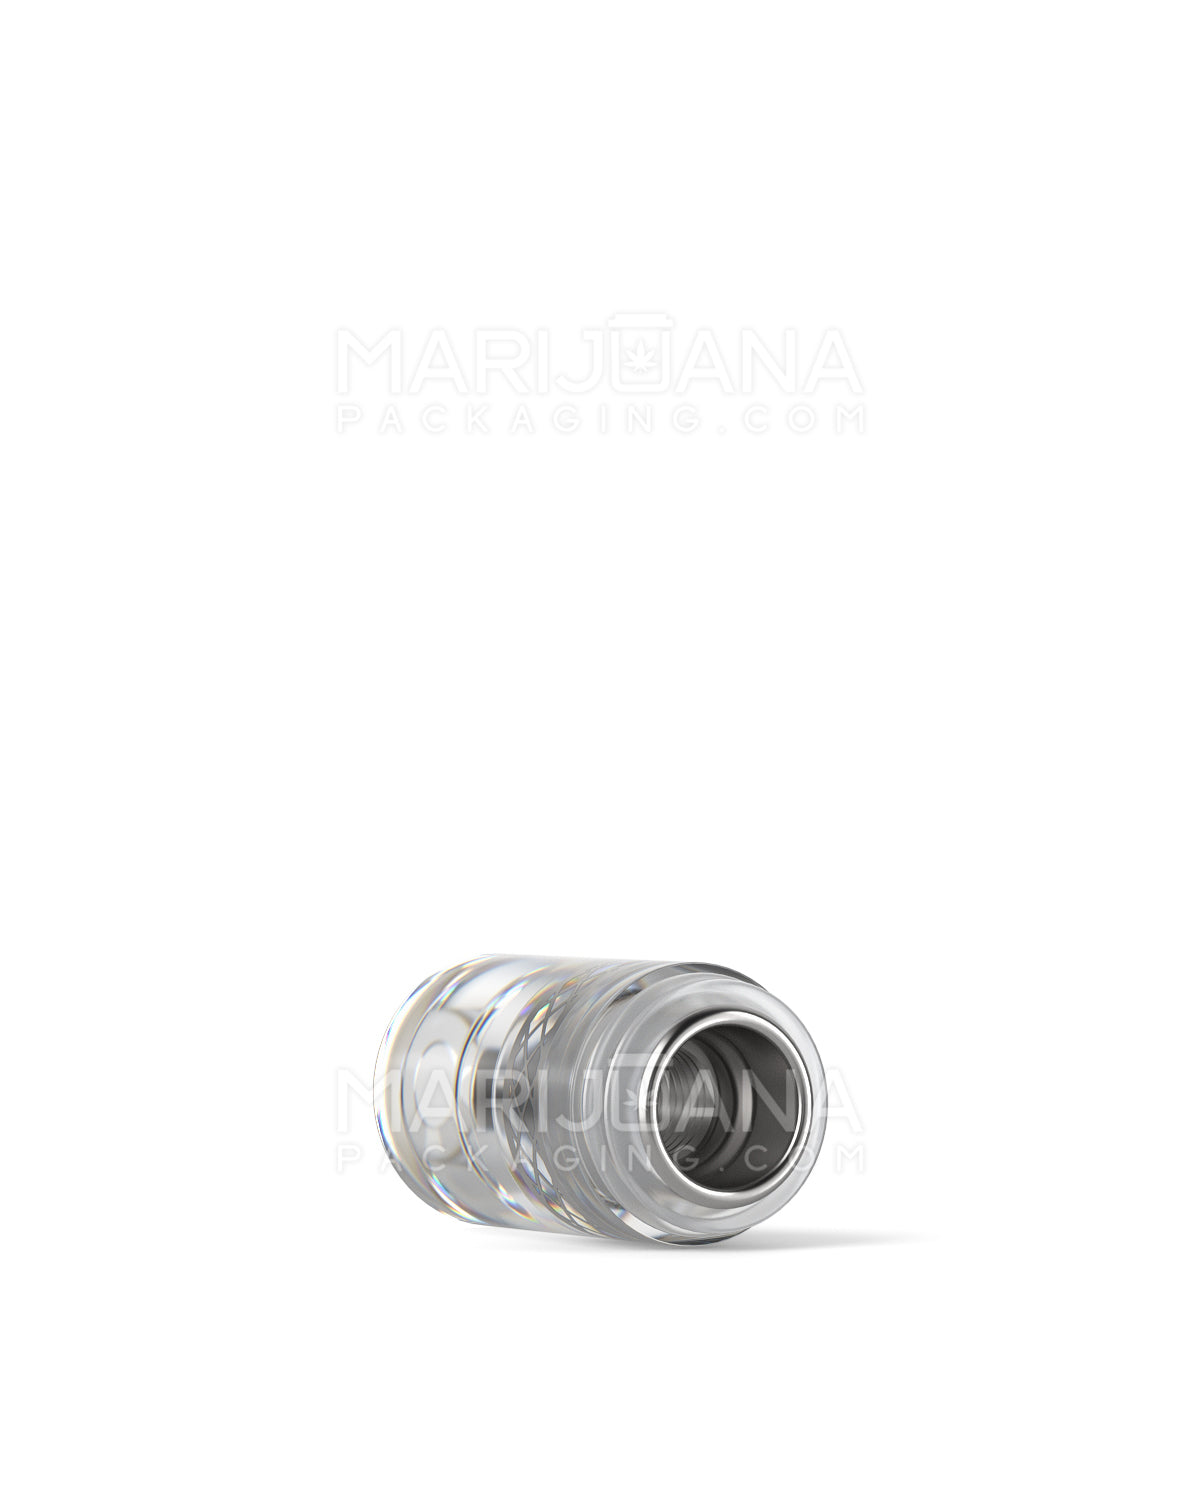 AVD | Barrel Vape Mouthpiece for Glass Cartridges | Clear Plastic - Screw On - 600 Count - 6